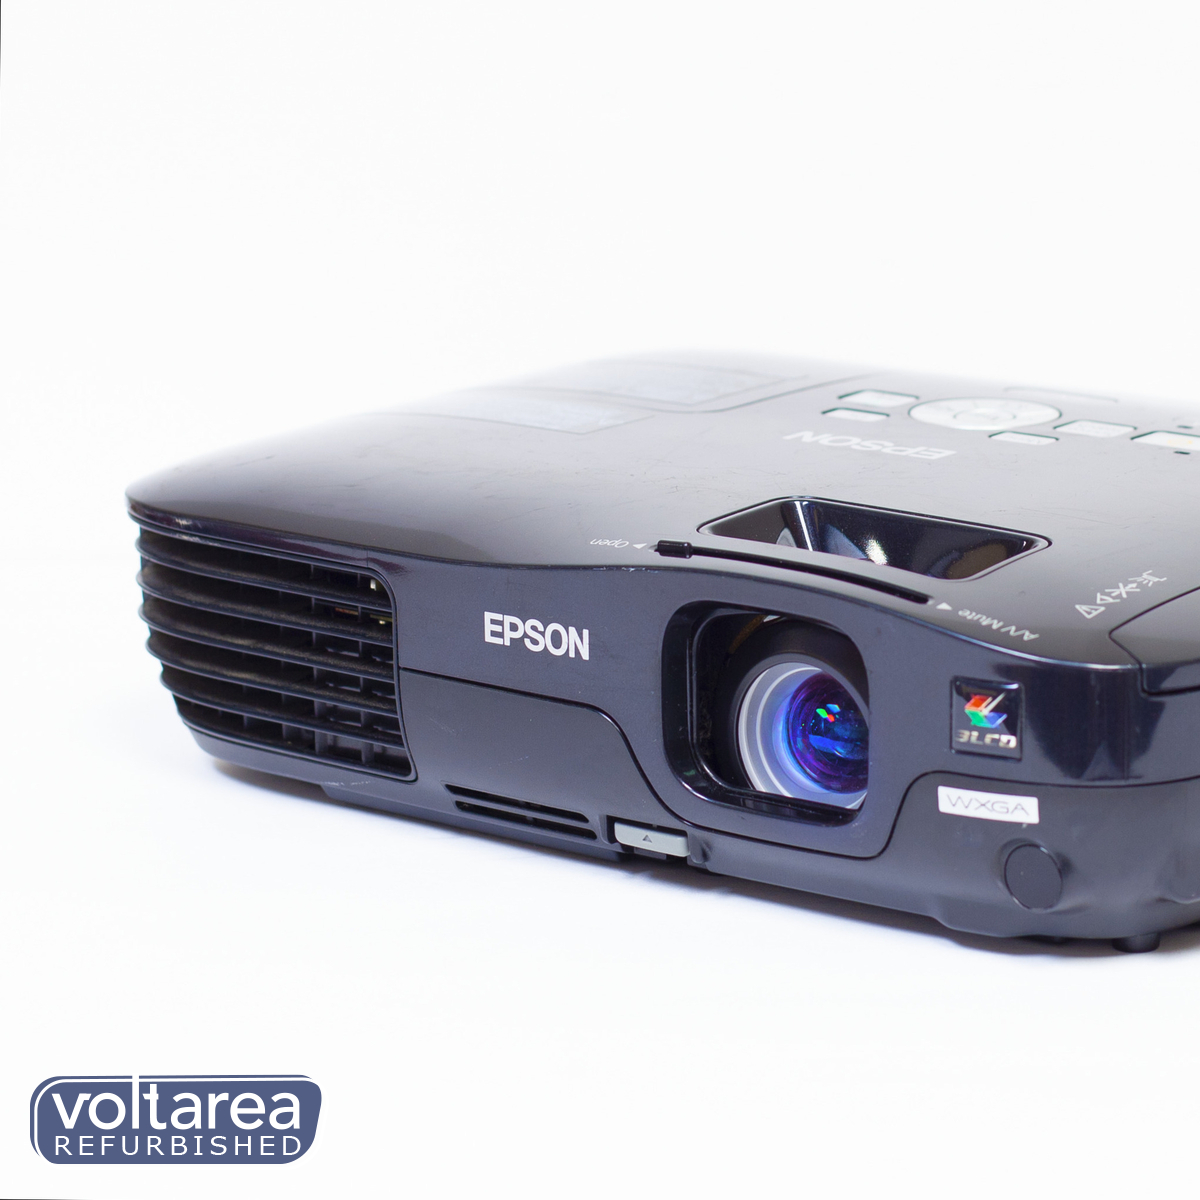 Epson ex71 Normal Throw Projector [Refurbished]